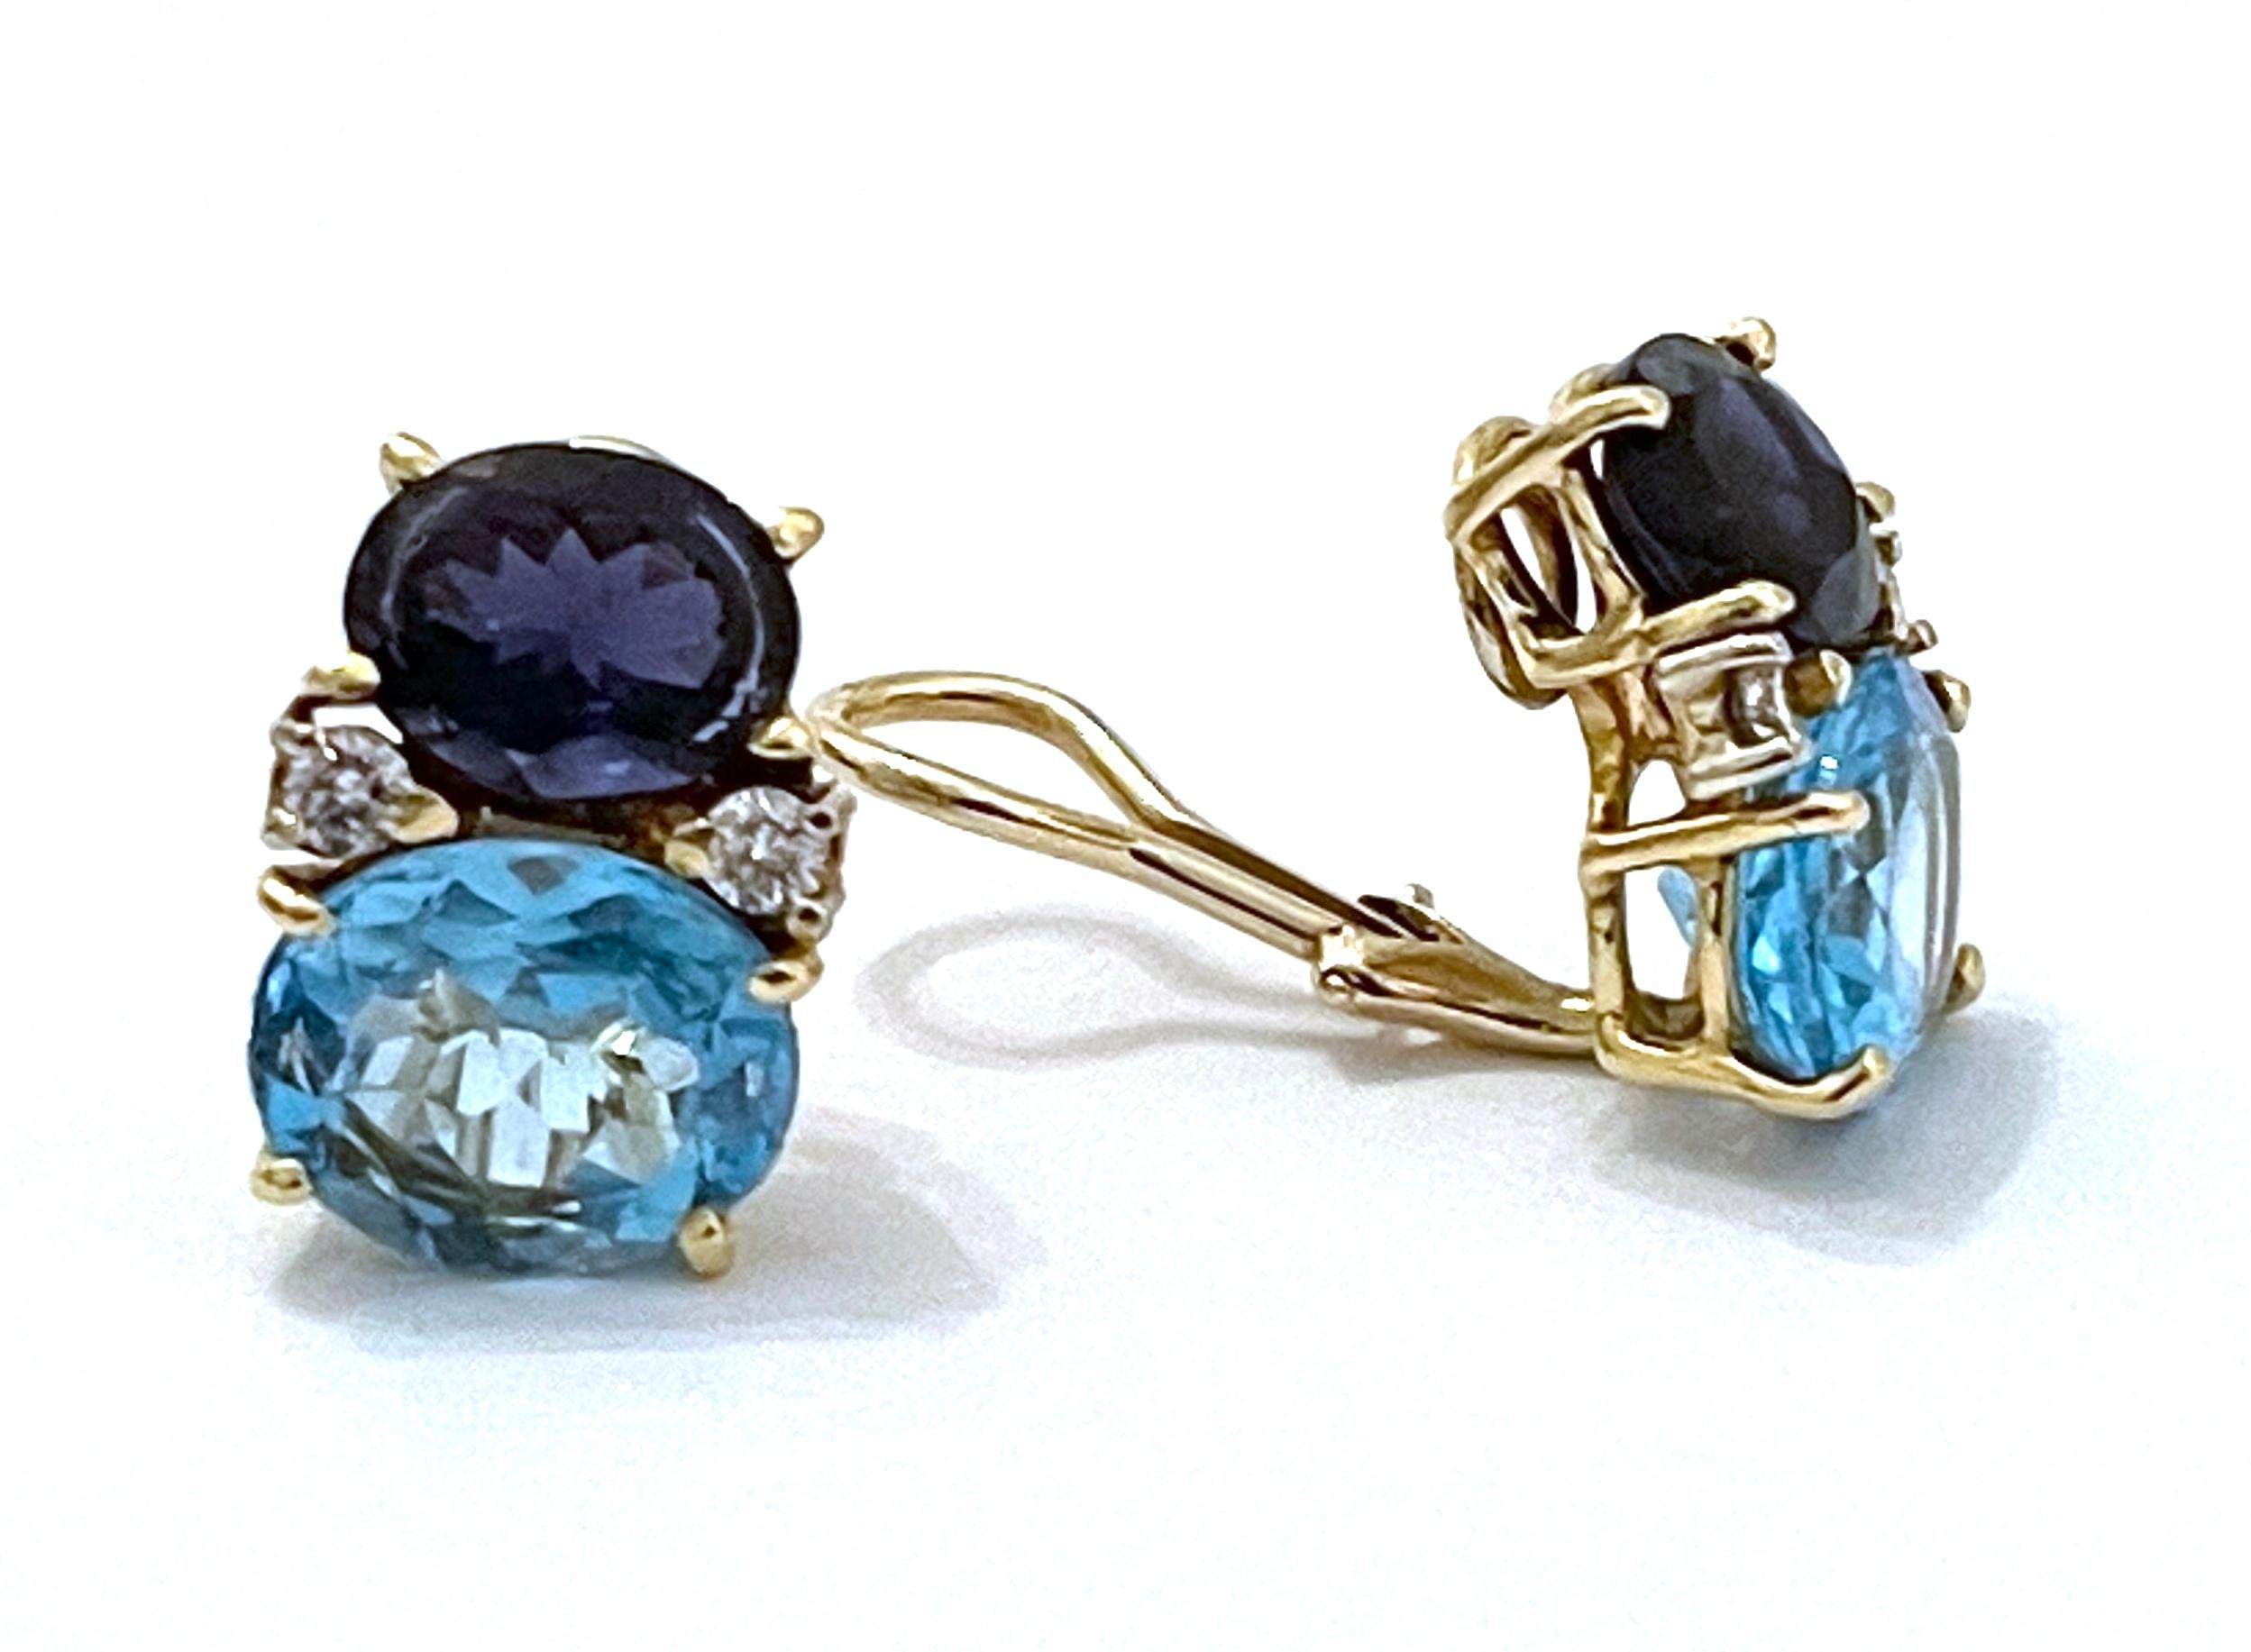 Medium 18kt White gold GUM DROP™ earrings with Iolite (approximately 2.5 cts each), Blue Topaz (approximately 5 cts each), and 4 diamonds weighing ~0.40 cts.

They can be made in ANY color stone combination that you would like!
Please contact us